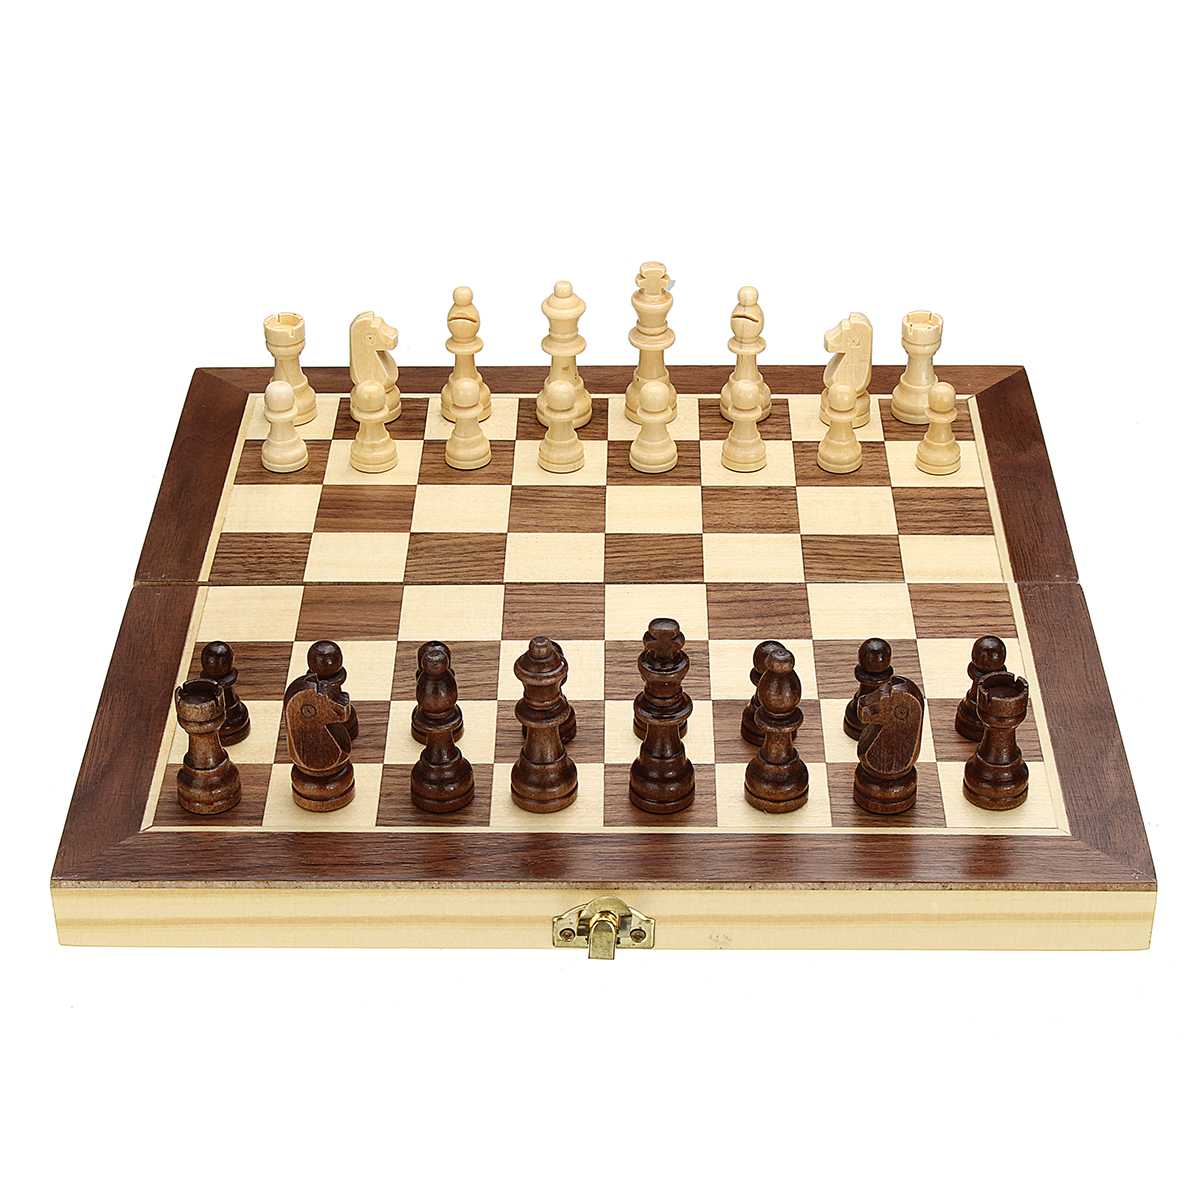 30x30cm Magnetic Wooden Folding Chess Set with Felted Game Board Interior for Storage Adult Kids Beginner Large Chess Board